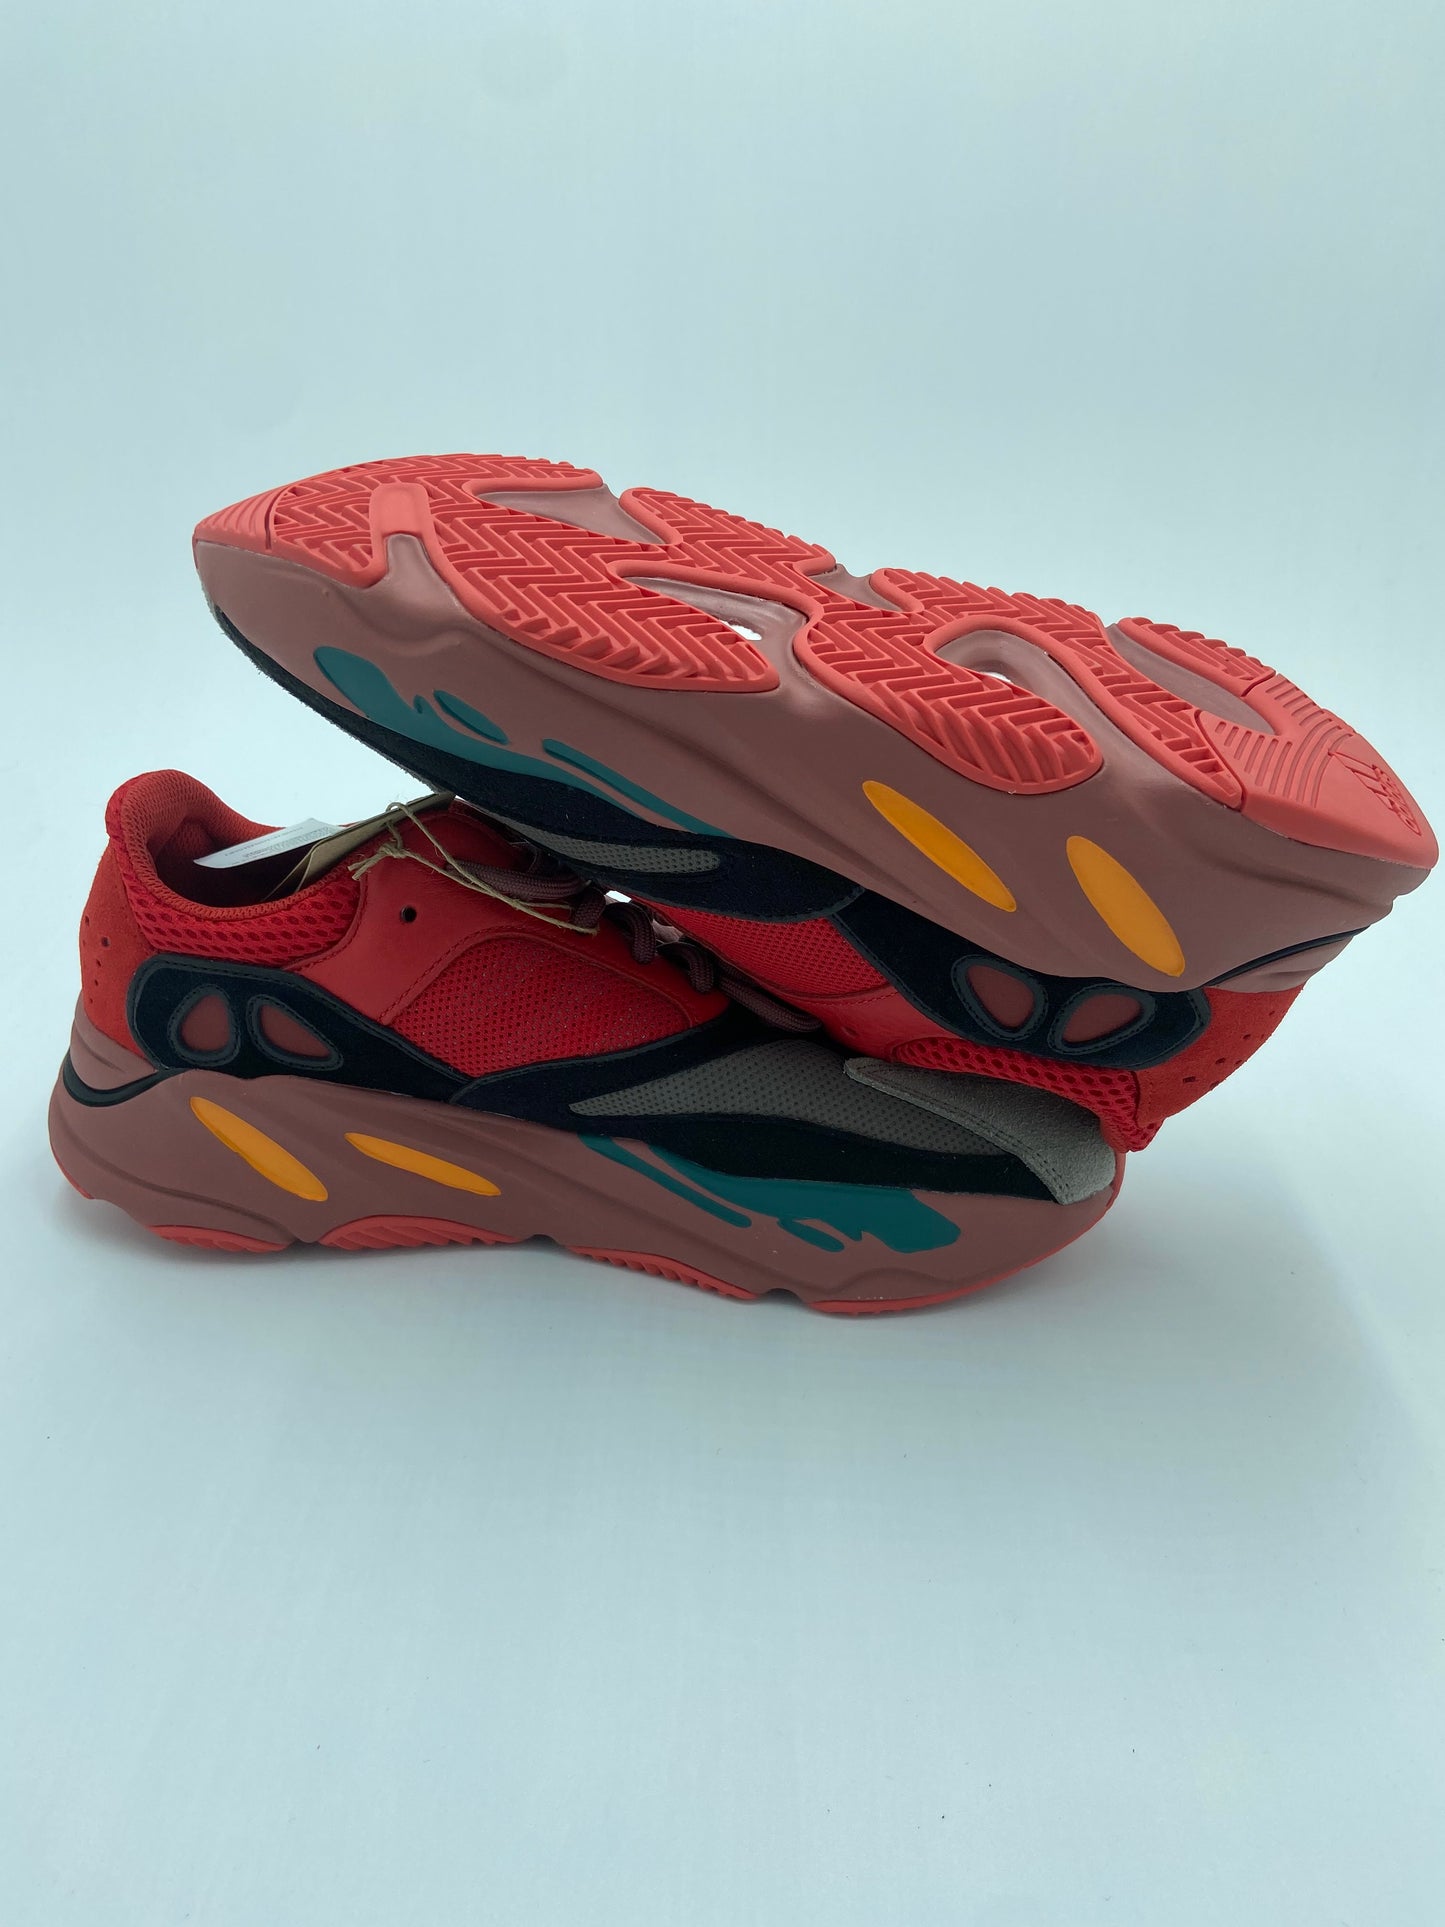 Yeezy Boost 700 Hi-Res Red *No Box*